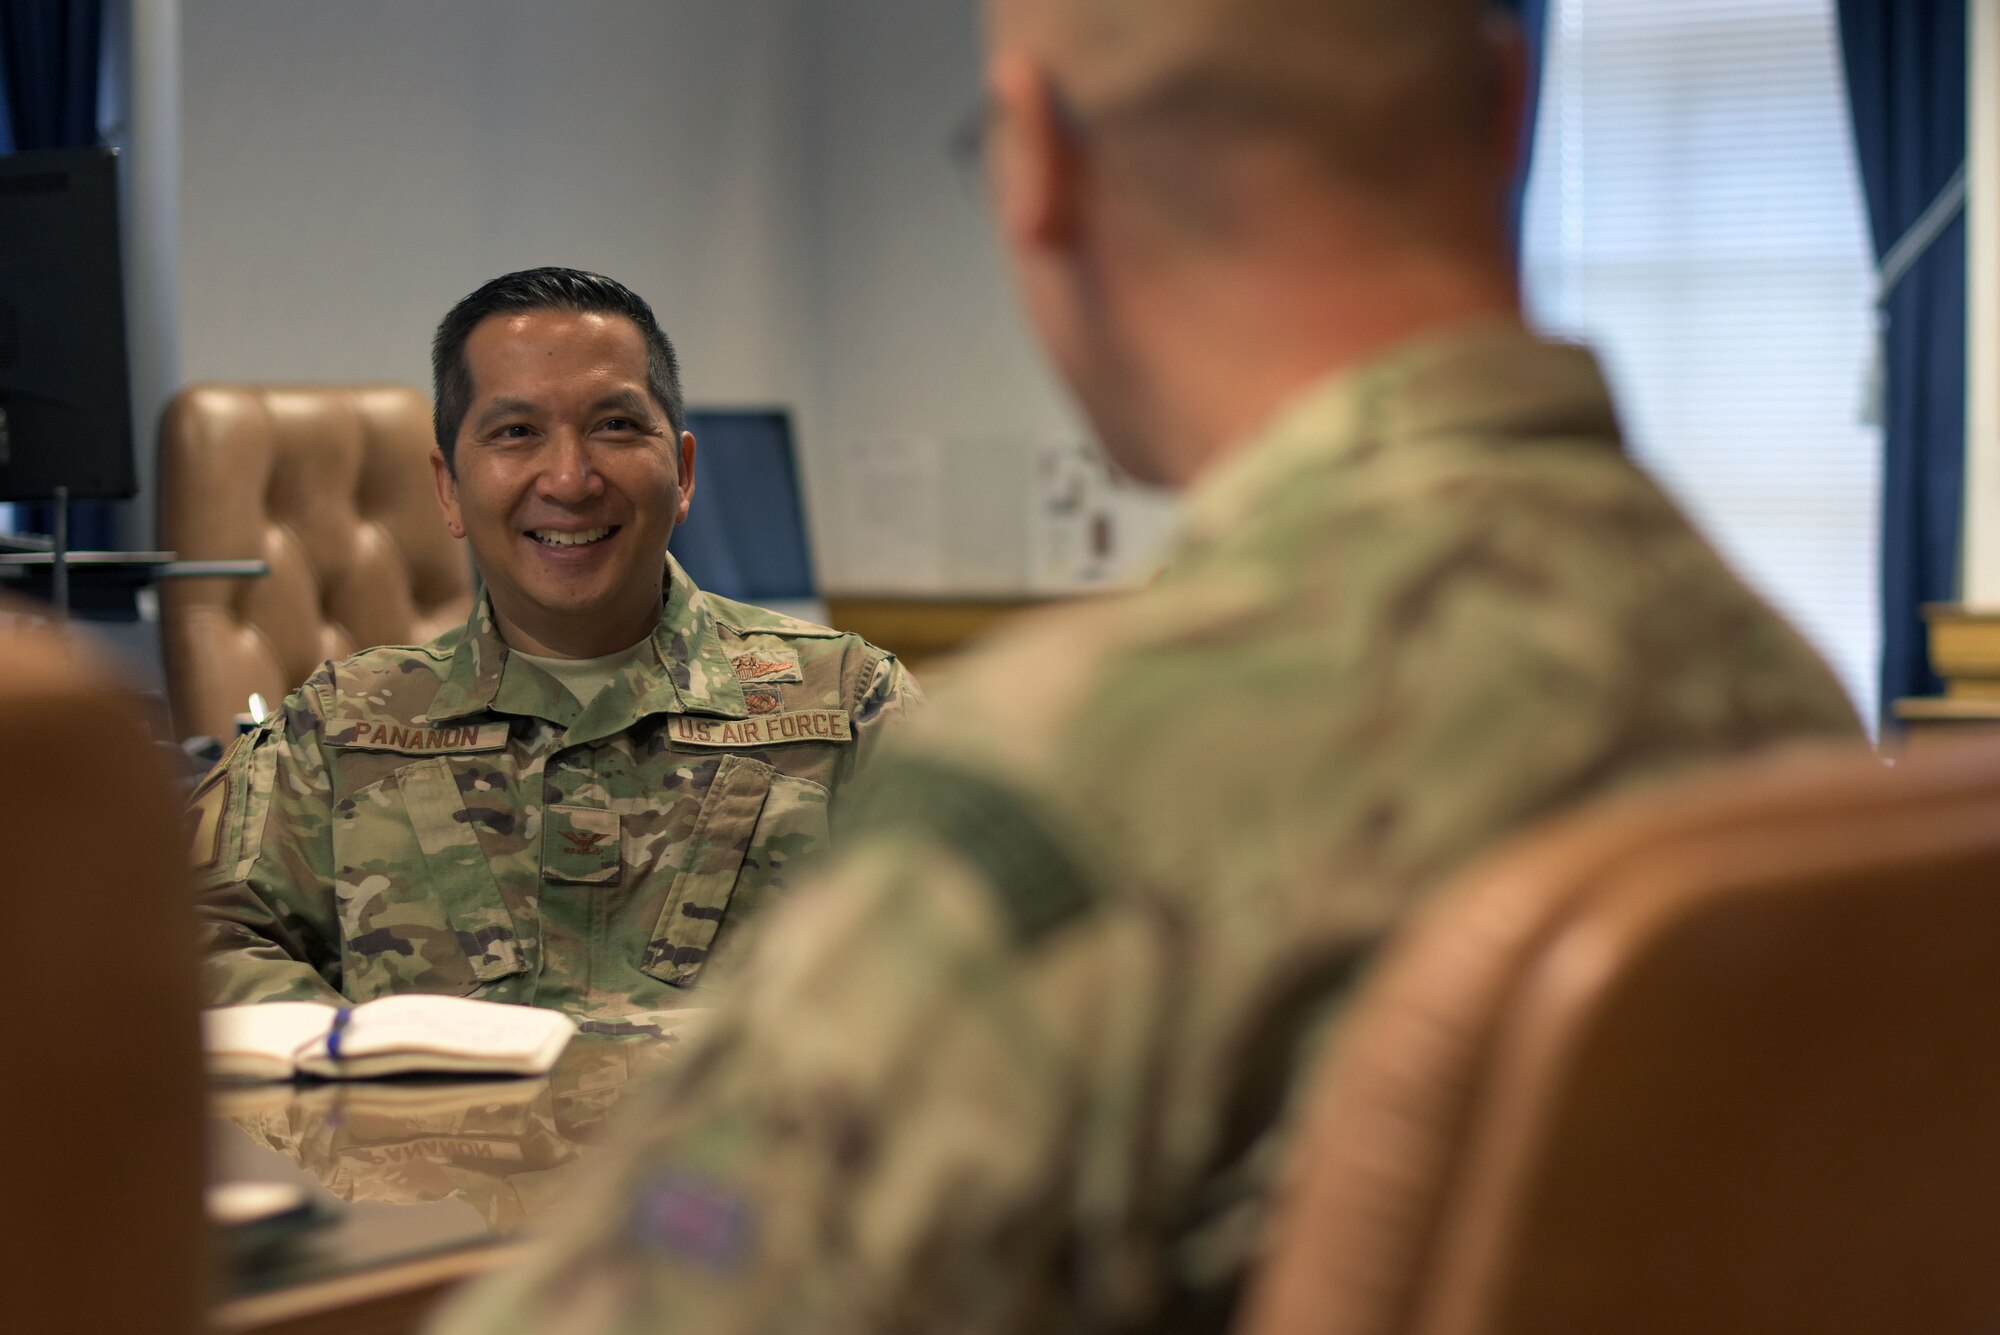 U.S. Air Force Col. Troy Pananon, 100th Air Refueling Wing commander, speaks with Squadron Leader Paul Graham, RAF Commander Mildenhall, at RAF Mildenhall, England, July 9, 2019. Pananon and Graham meet occasionally to discuss the best way to continue to maintain the strong relationship between the U.S. Air Force and the RAF at Mildenhall. (U.S. Air Force photo by Senior Airman Benjamin Cooper)